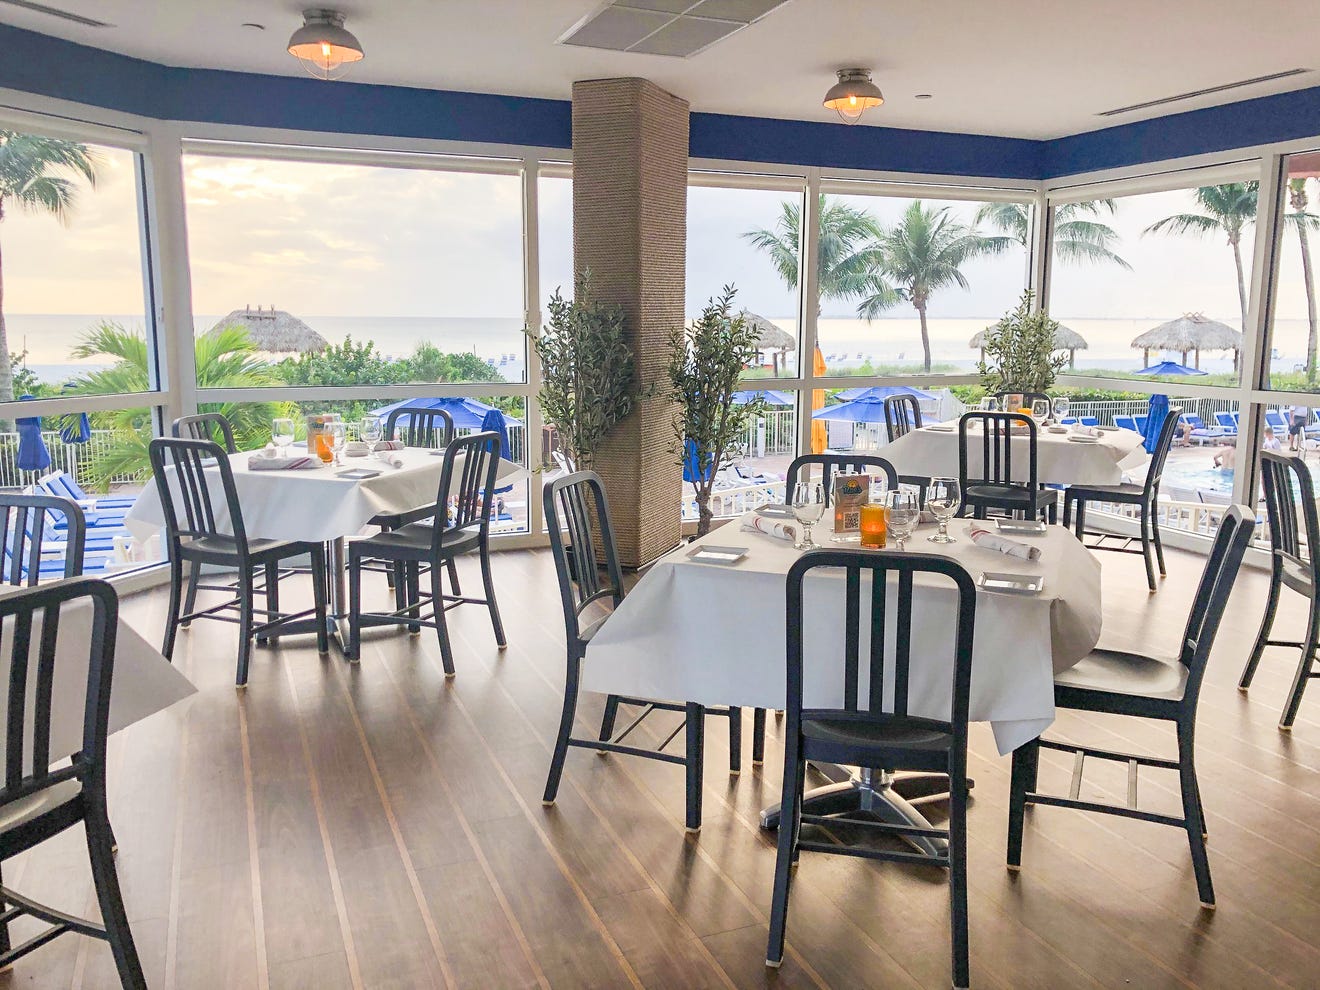 New restaurant opens Fort Myers Beach; find Feasts of the Seven Fishes